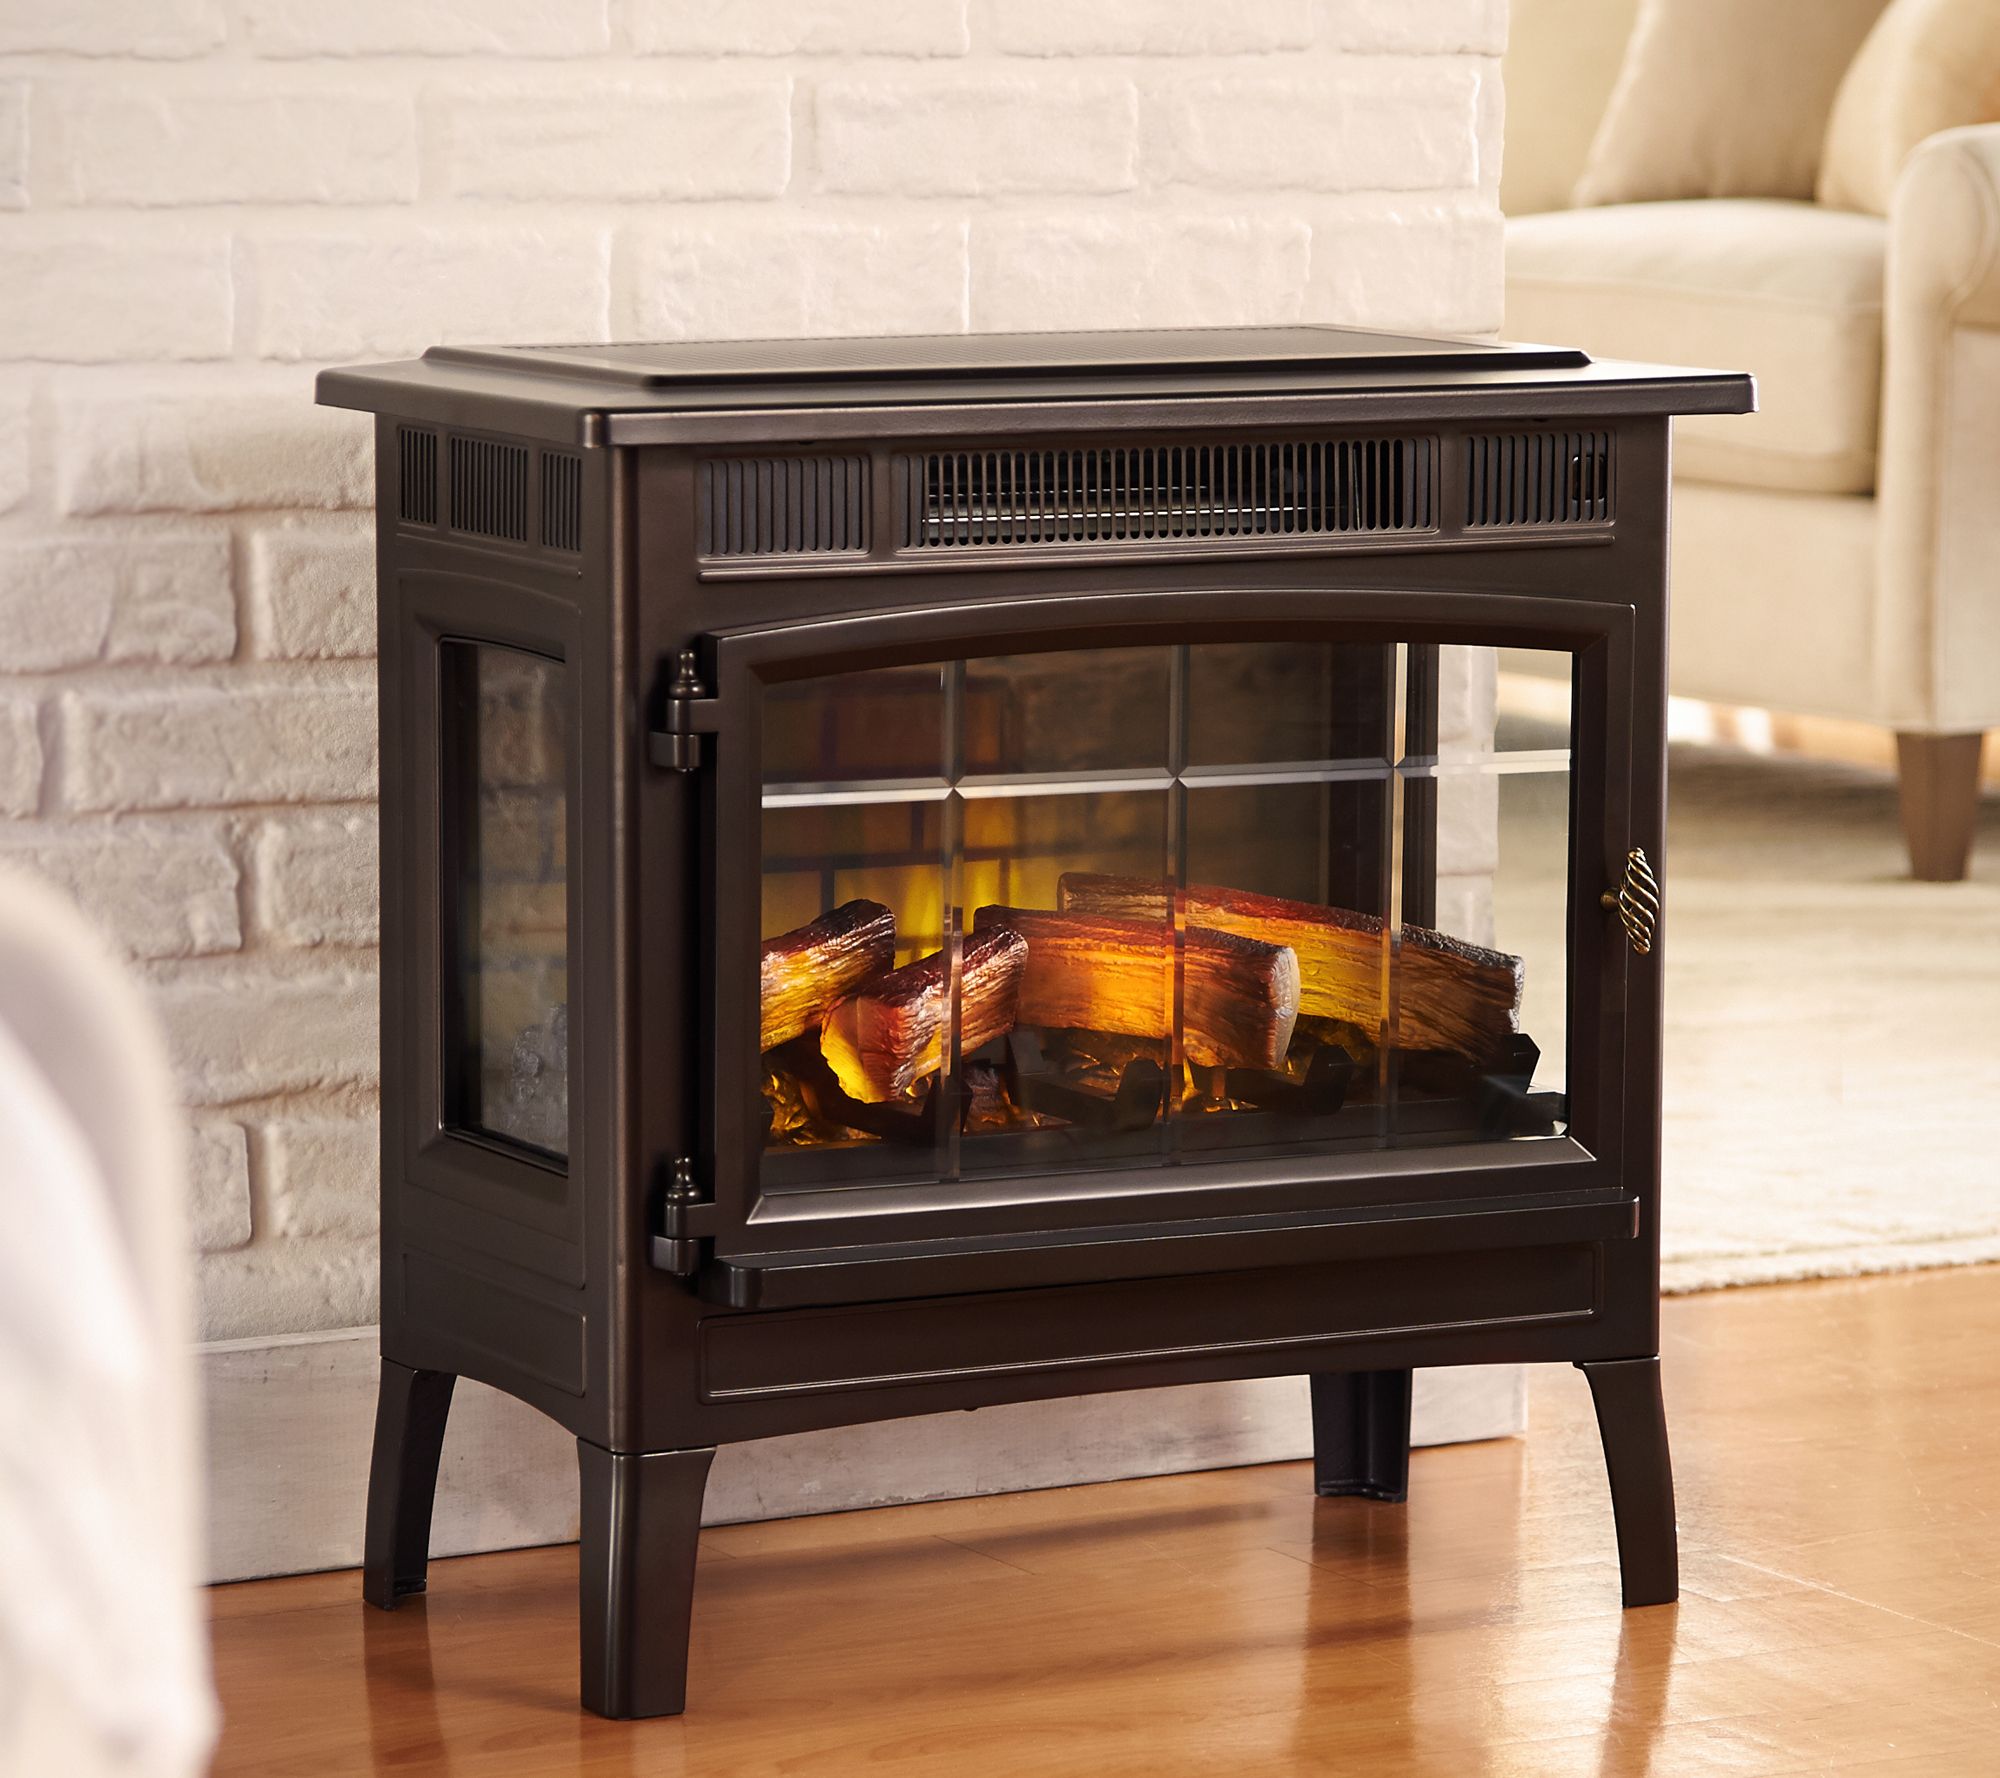 Sams Club Electric Fireplace Elegant Duraflame Infrared Quartz Stove Heater with 3d Flame Effect & Remote — Qvc